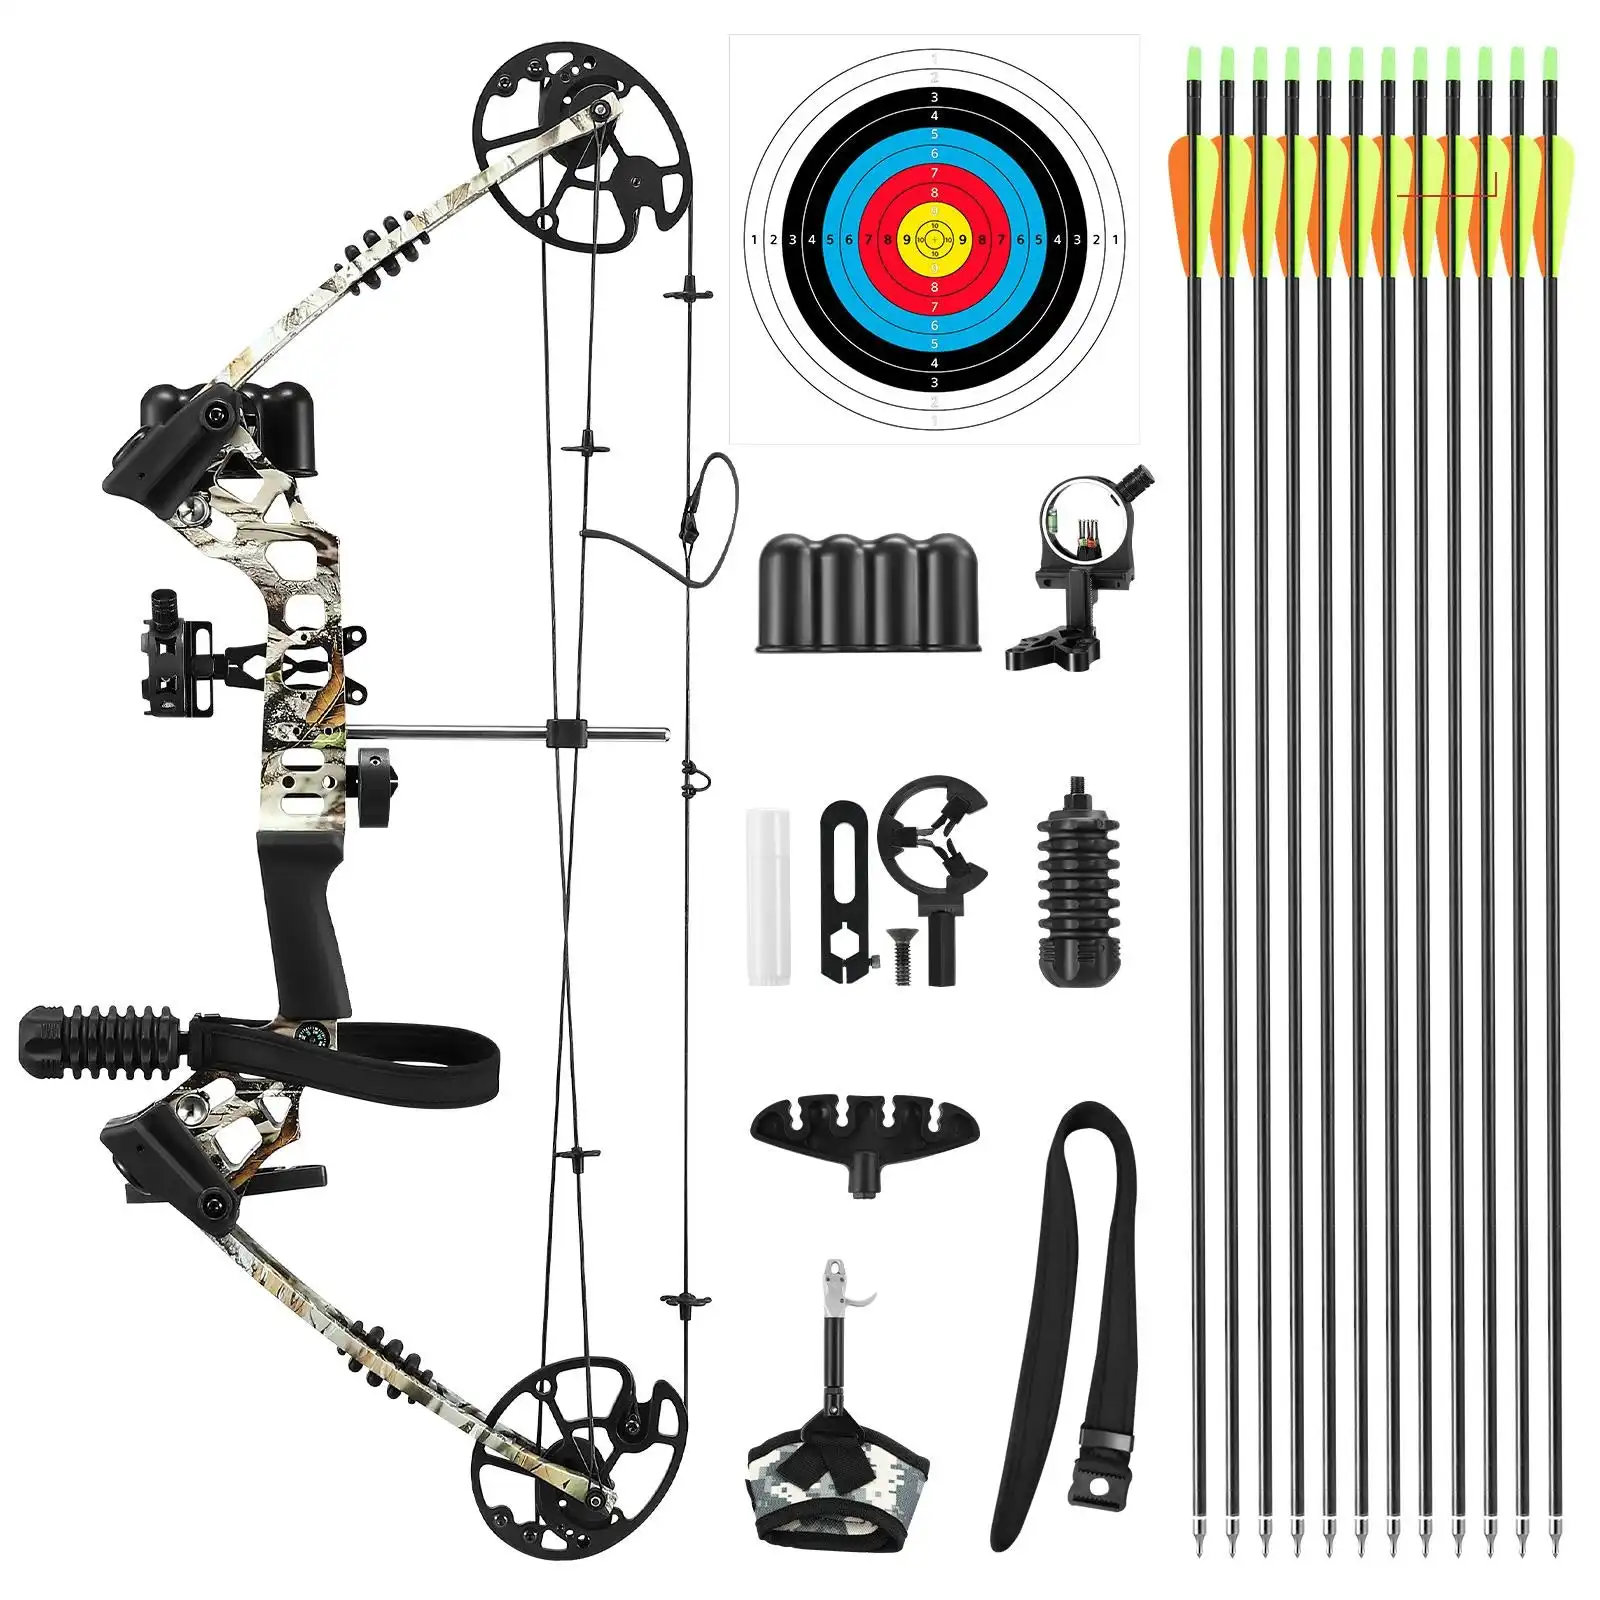 Ausway Compound Bow Arrow Set Archery Sports Hunting Target Shooting RH 20-70lbs Adjustable 320fps Speed for Beginner Master Camo